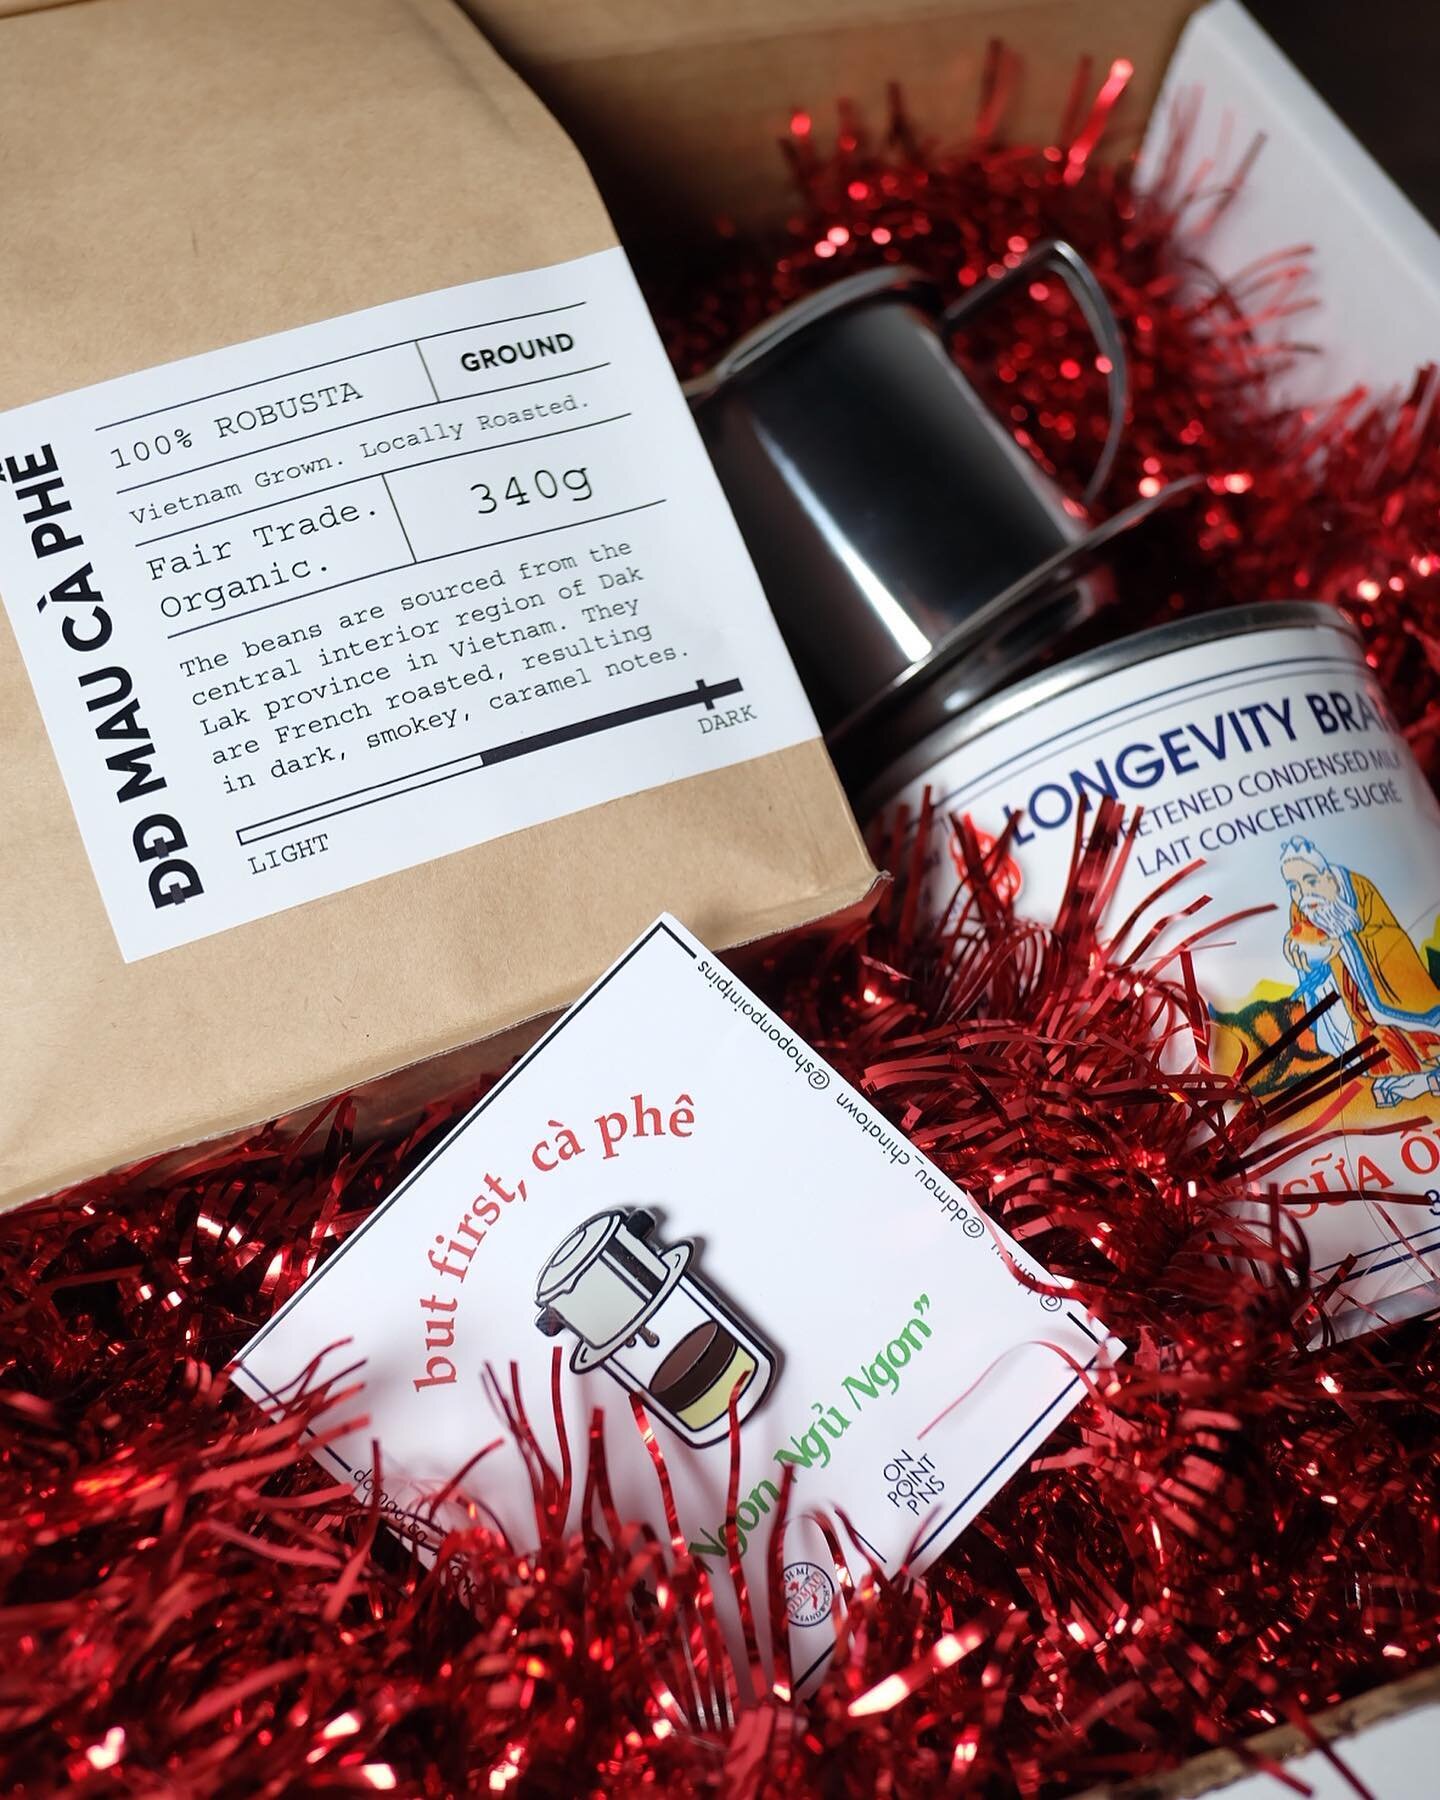 A gift for those early mornings and long nights.

Our cà phê kits have a special addition for the holidays. The cà phê phin enamel pins from @onpointpins are part of our Holiday kit! 

$32 gets you a bag of our signature DD Mau ground coffee sour